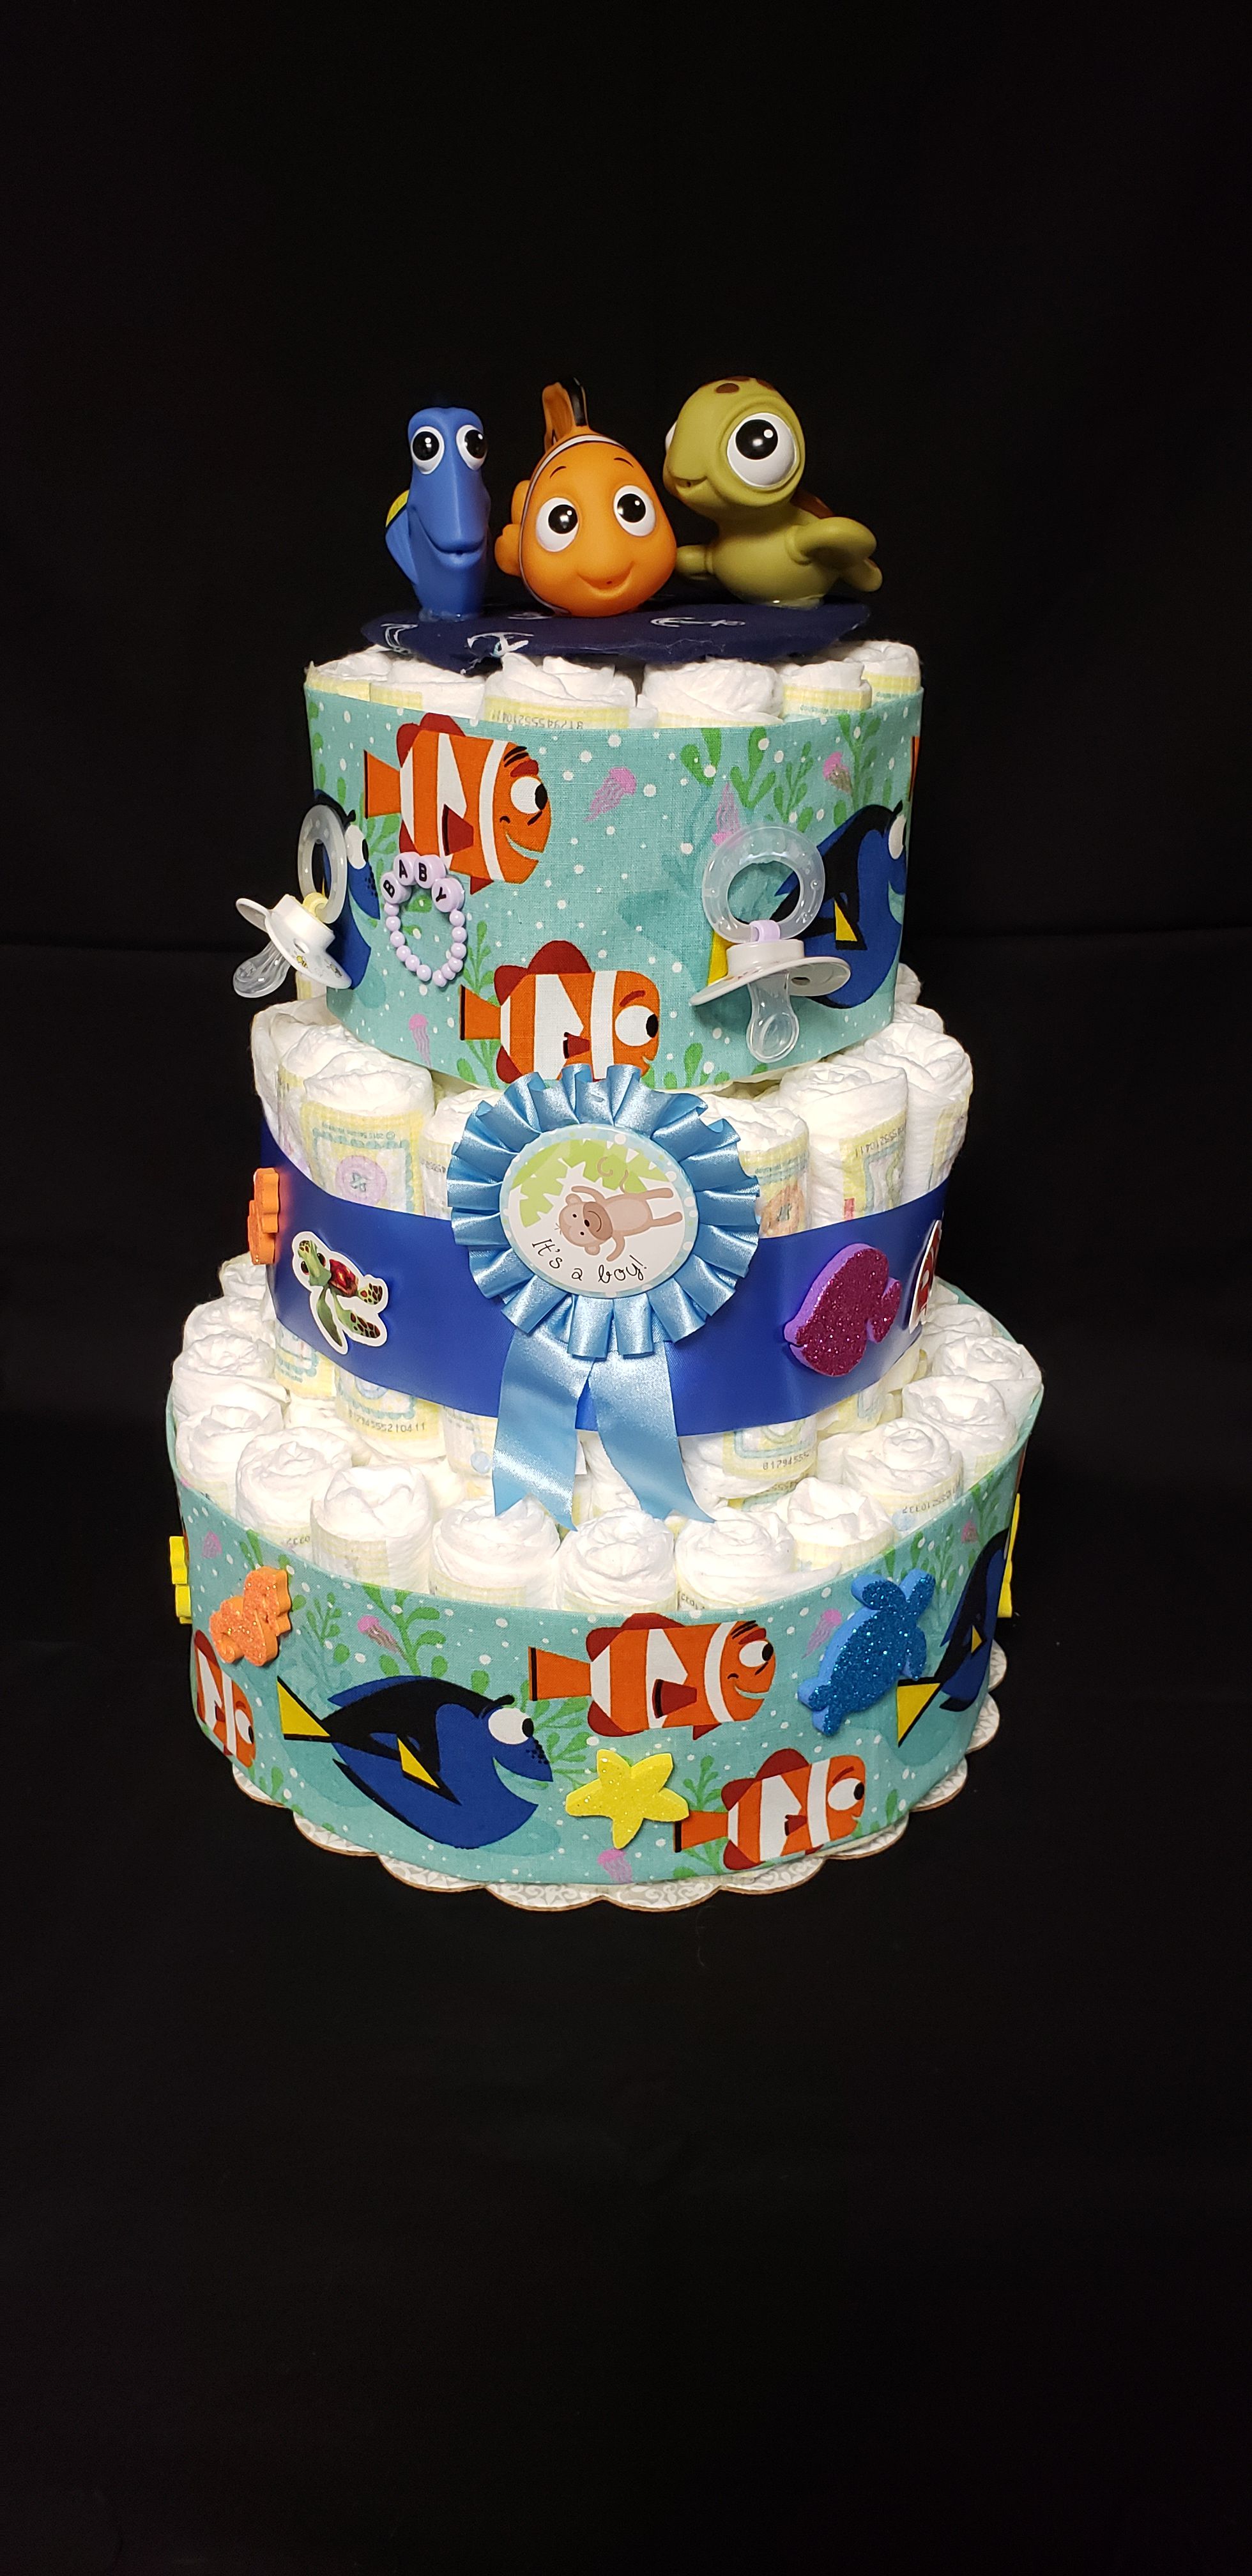 Finding Nemo Diaper Cake Baby Shower 92 Pampers Size 1 for Sale in Gresham,  OR - OfferUp